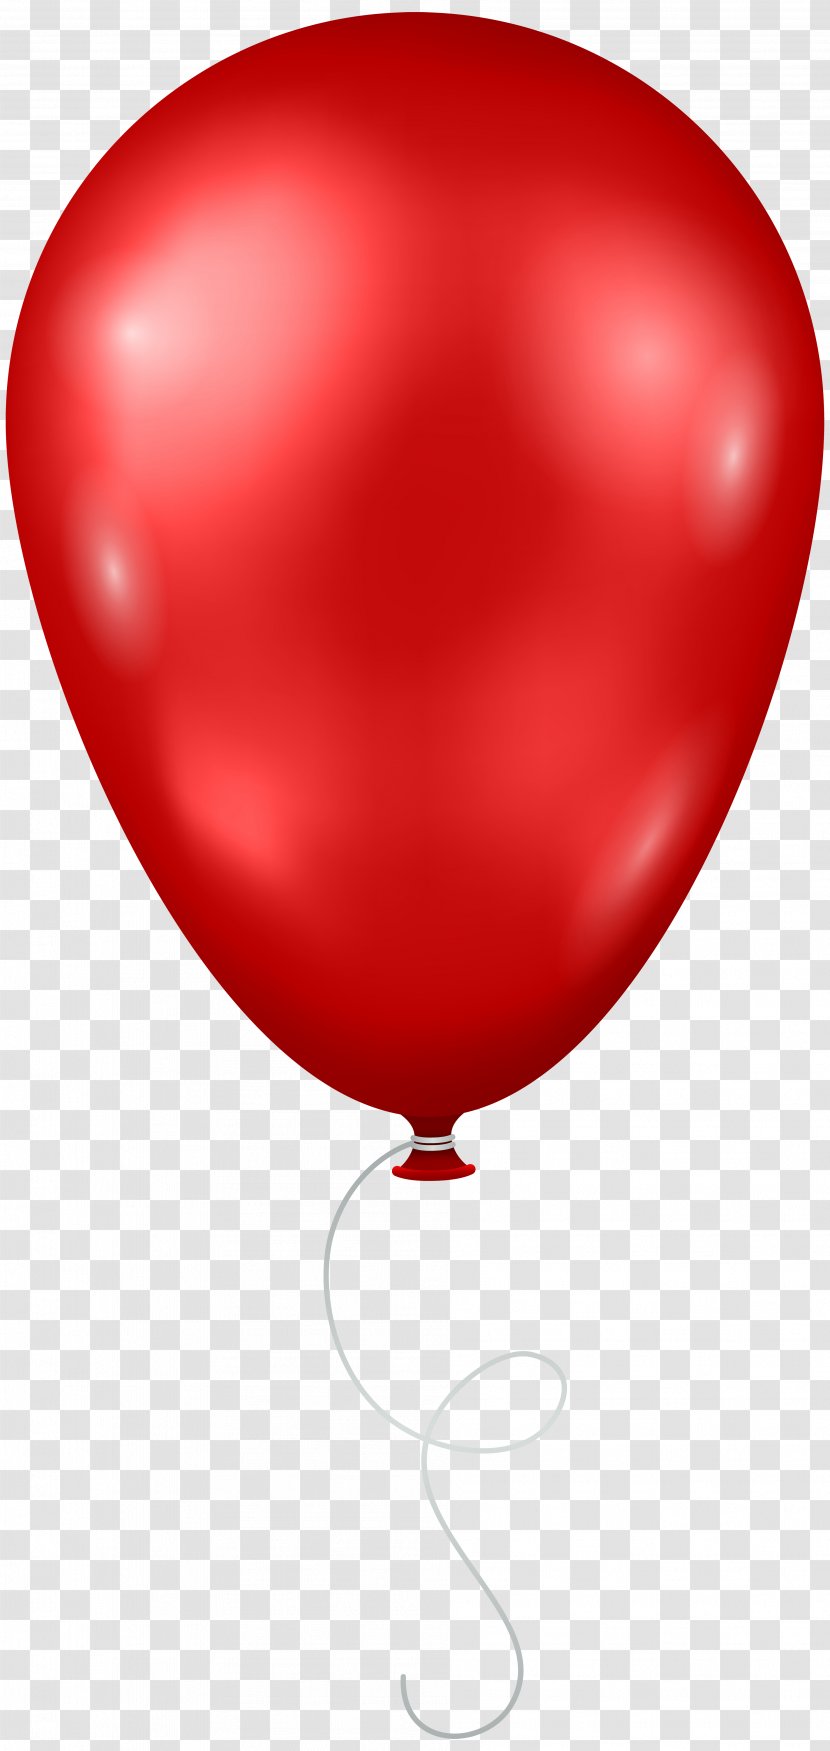 Image File Formats Lossless Compression - Drawing - Red Balloon Transparent Clip Art Transparent PNG